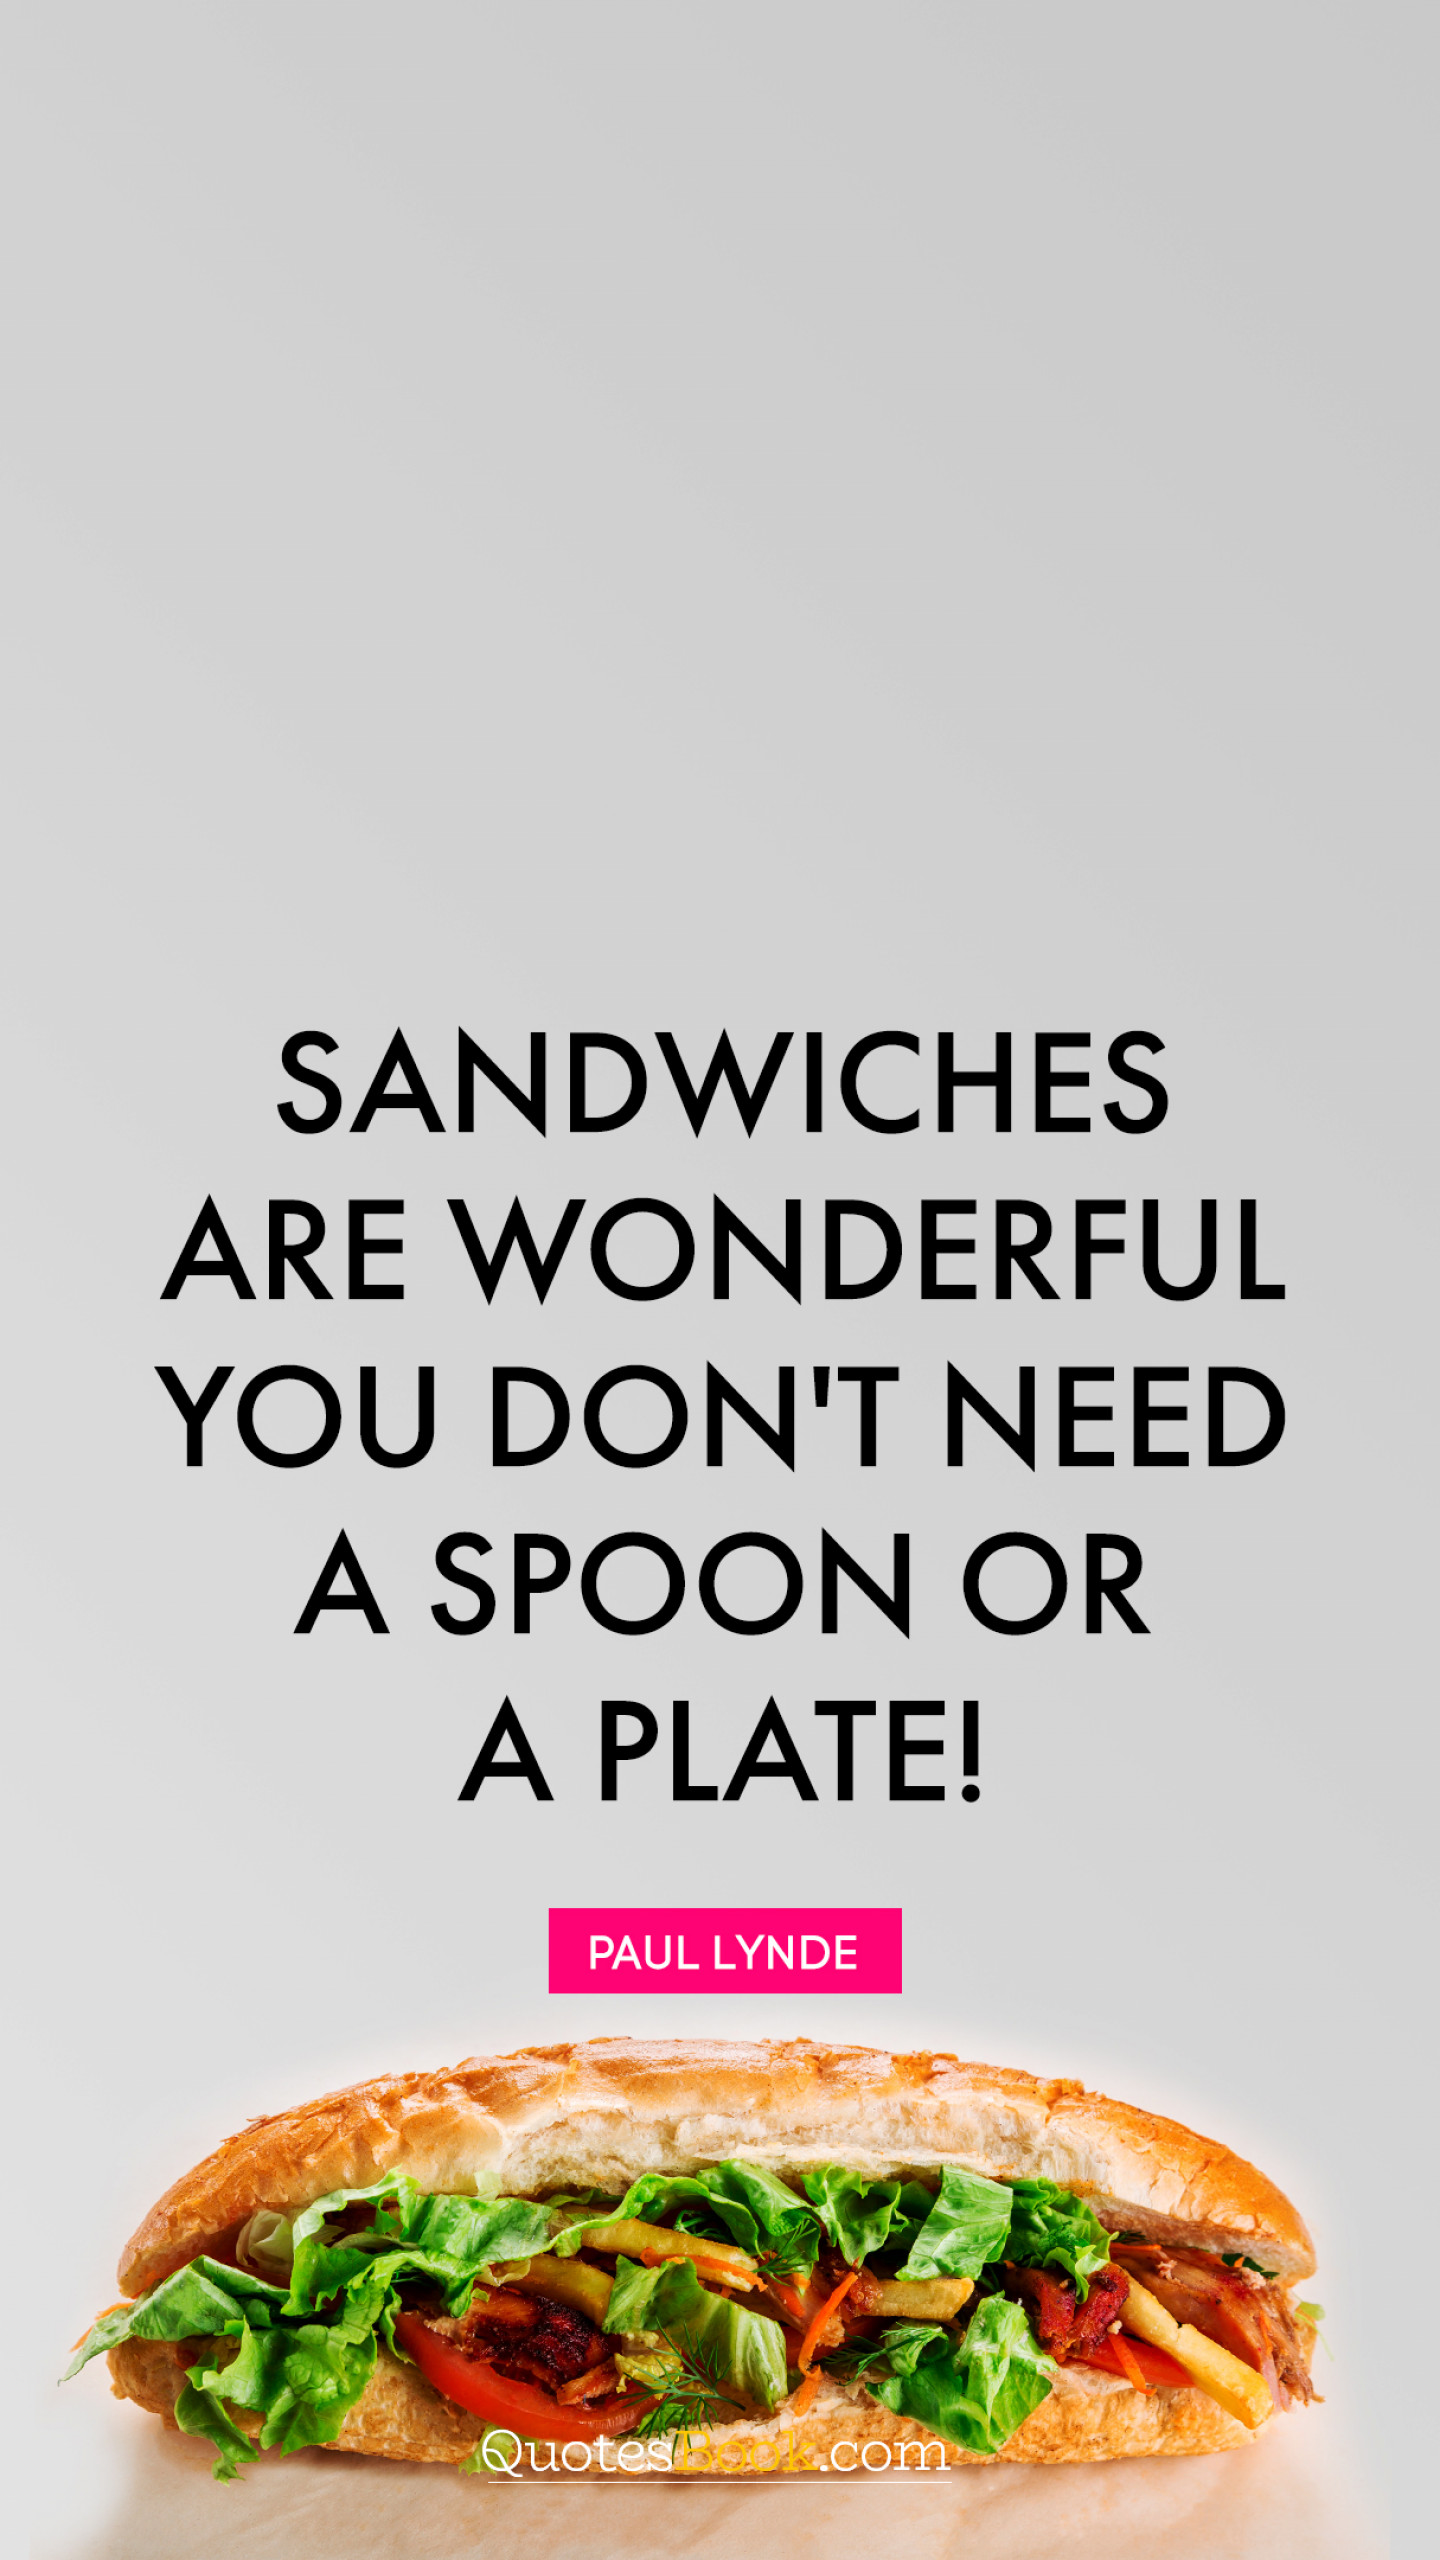 Sandwiches are wonderful. You don't need a spoon or a plate!. - Quote